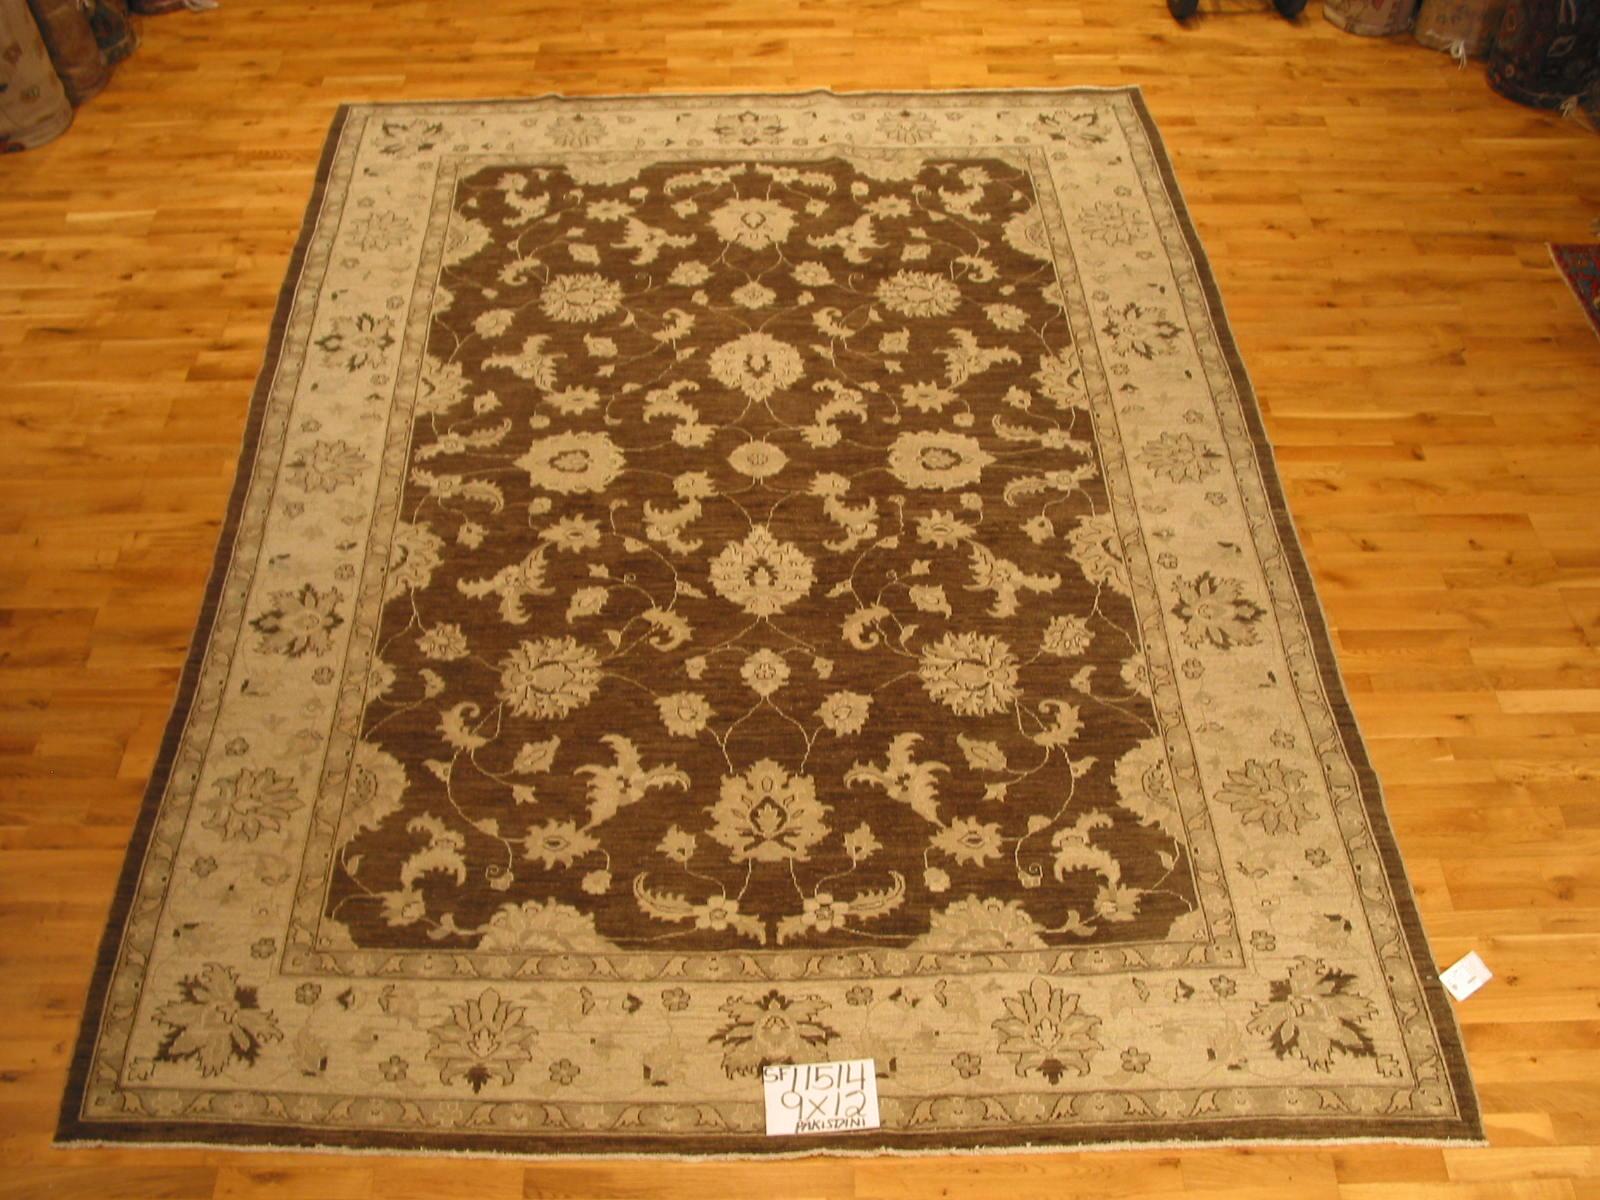 A deep brown center panel with swirling floral motif framed by a wide beige floral border. Durable hand knotted wool construction creates a rug that will last for years to come in the home or office. Made in Pakistan using vegetal dyes.